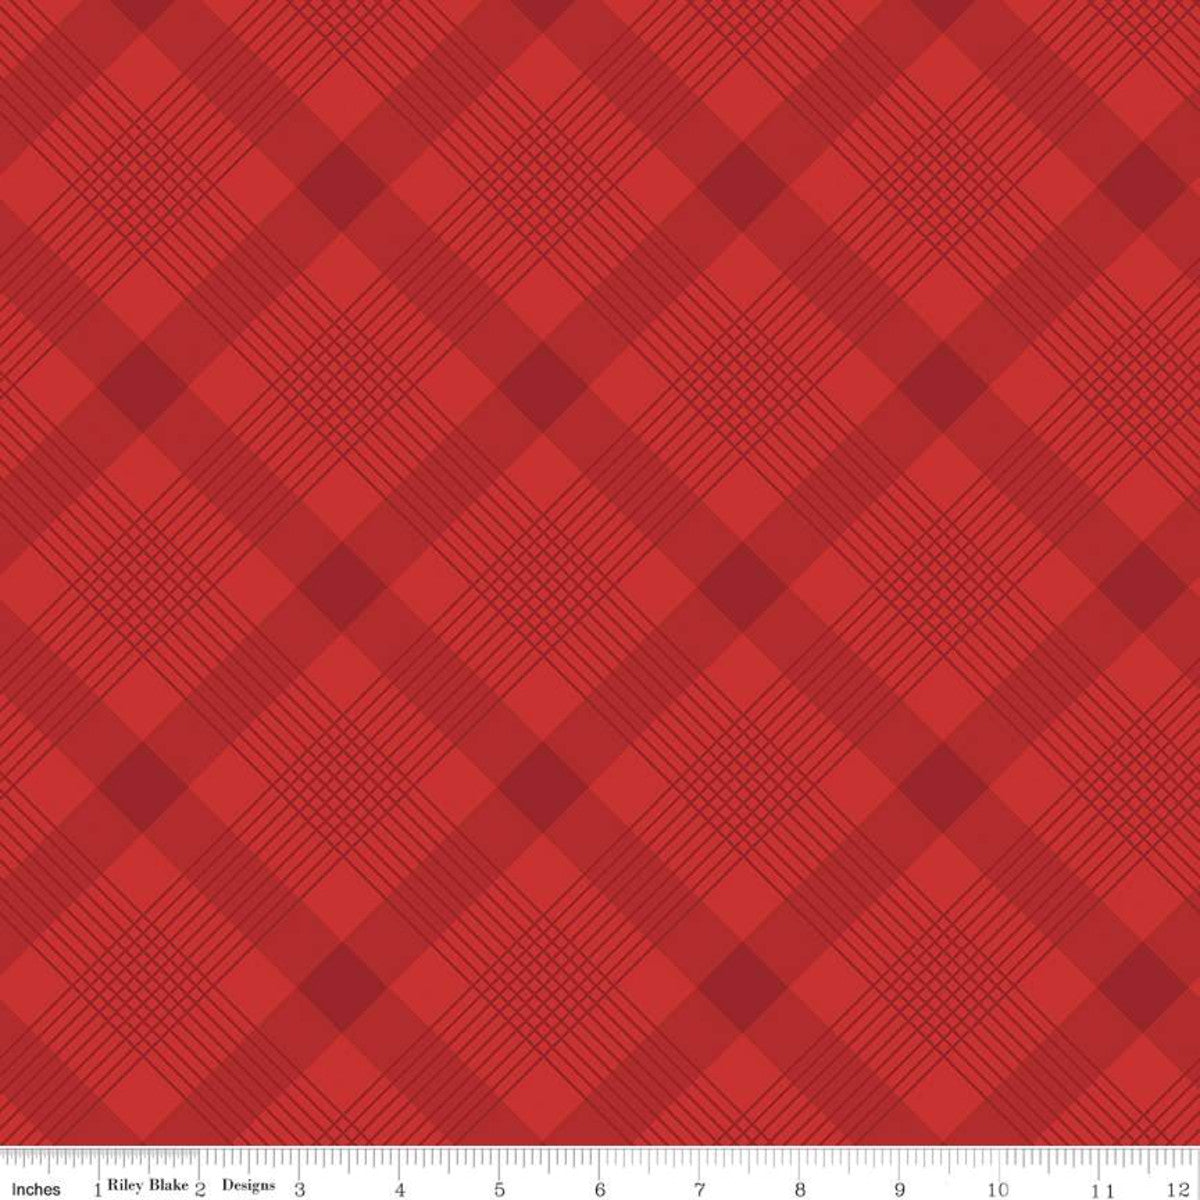 Falling in Love by Dani Mogstad Plaid Red     C11285-RED Cotton Woven Fabric